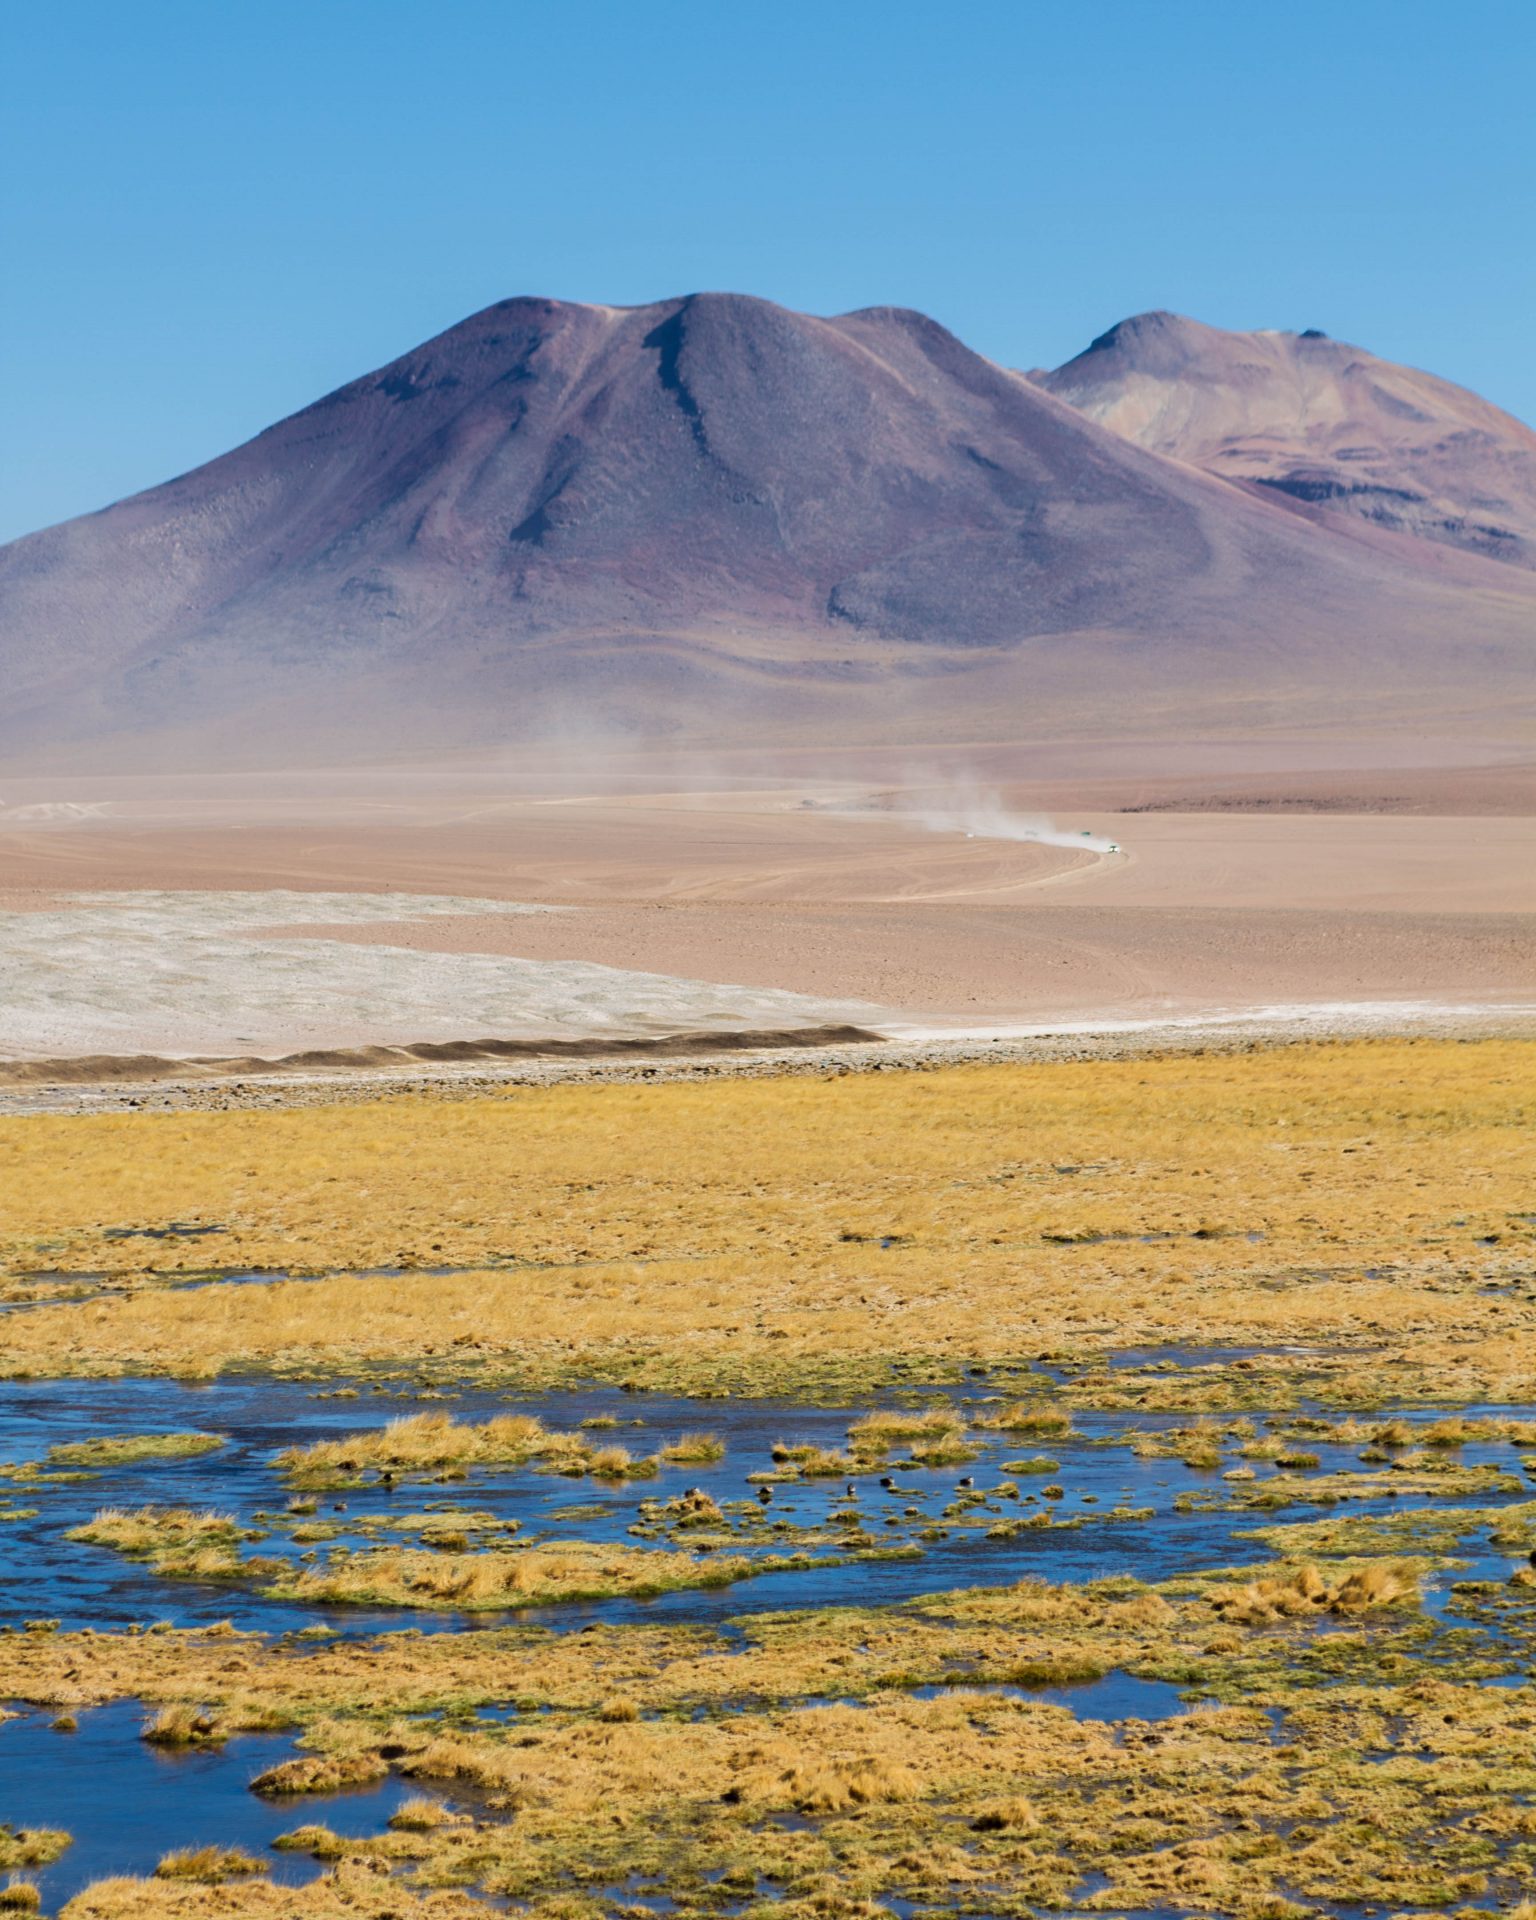 View of Andes mountains which house the El Tatio Geyser Field.